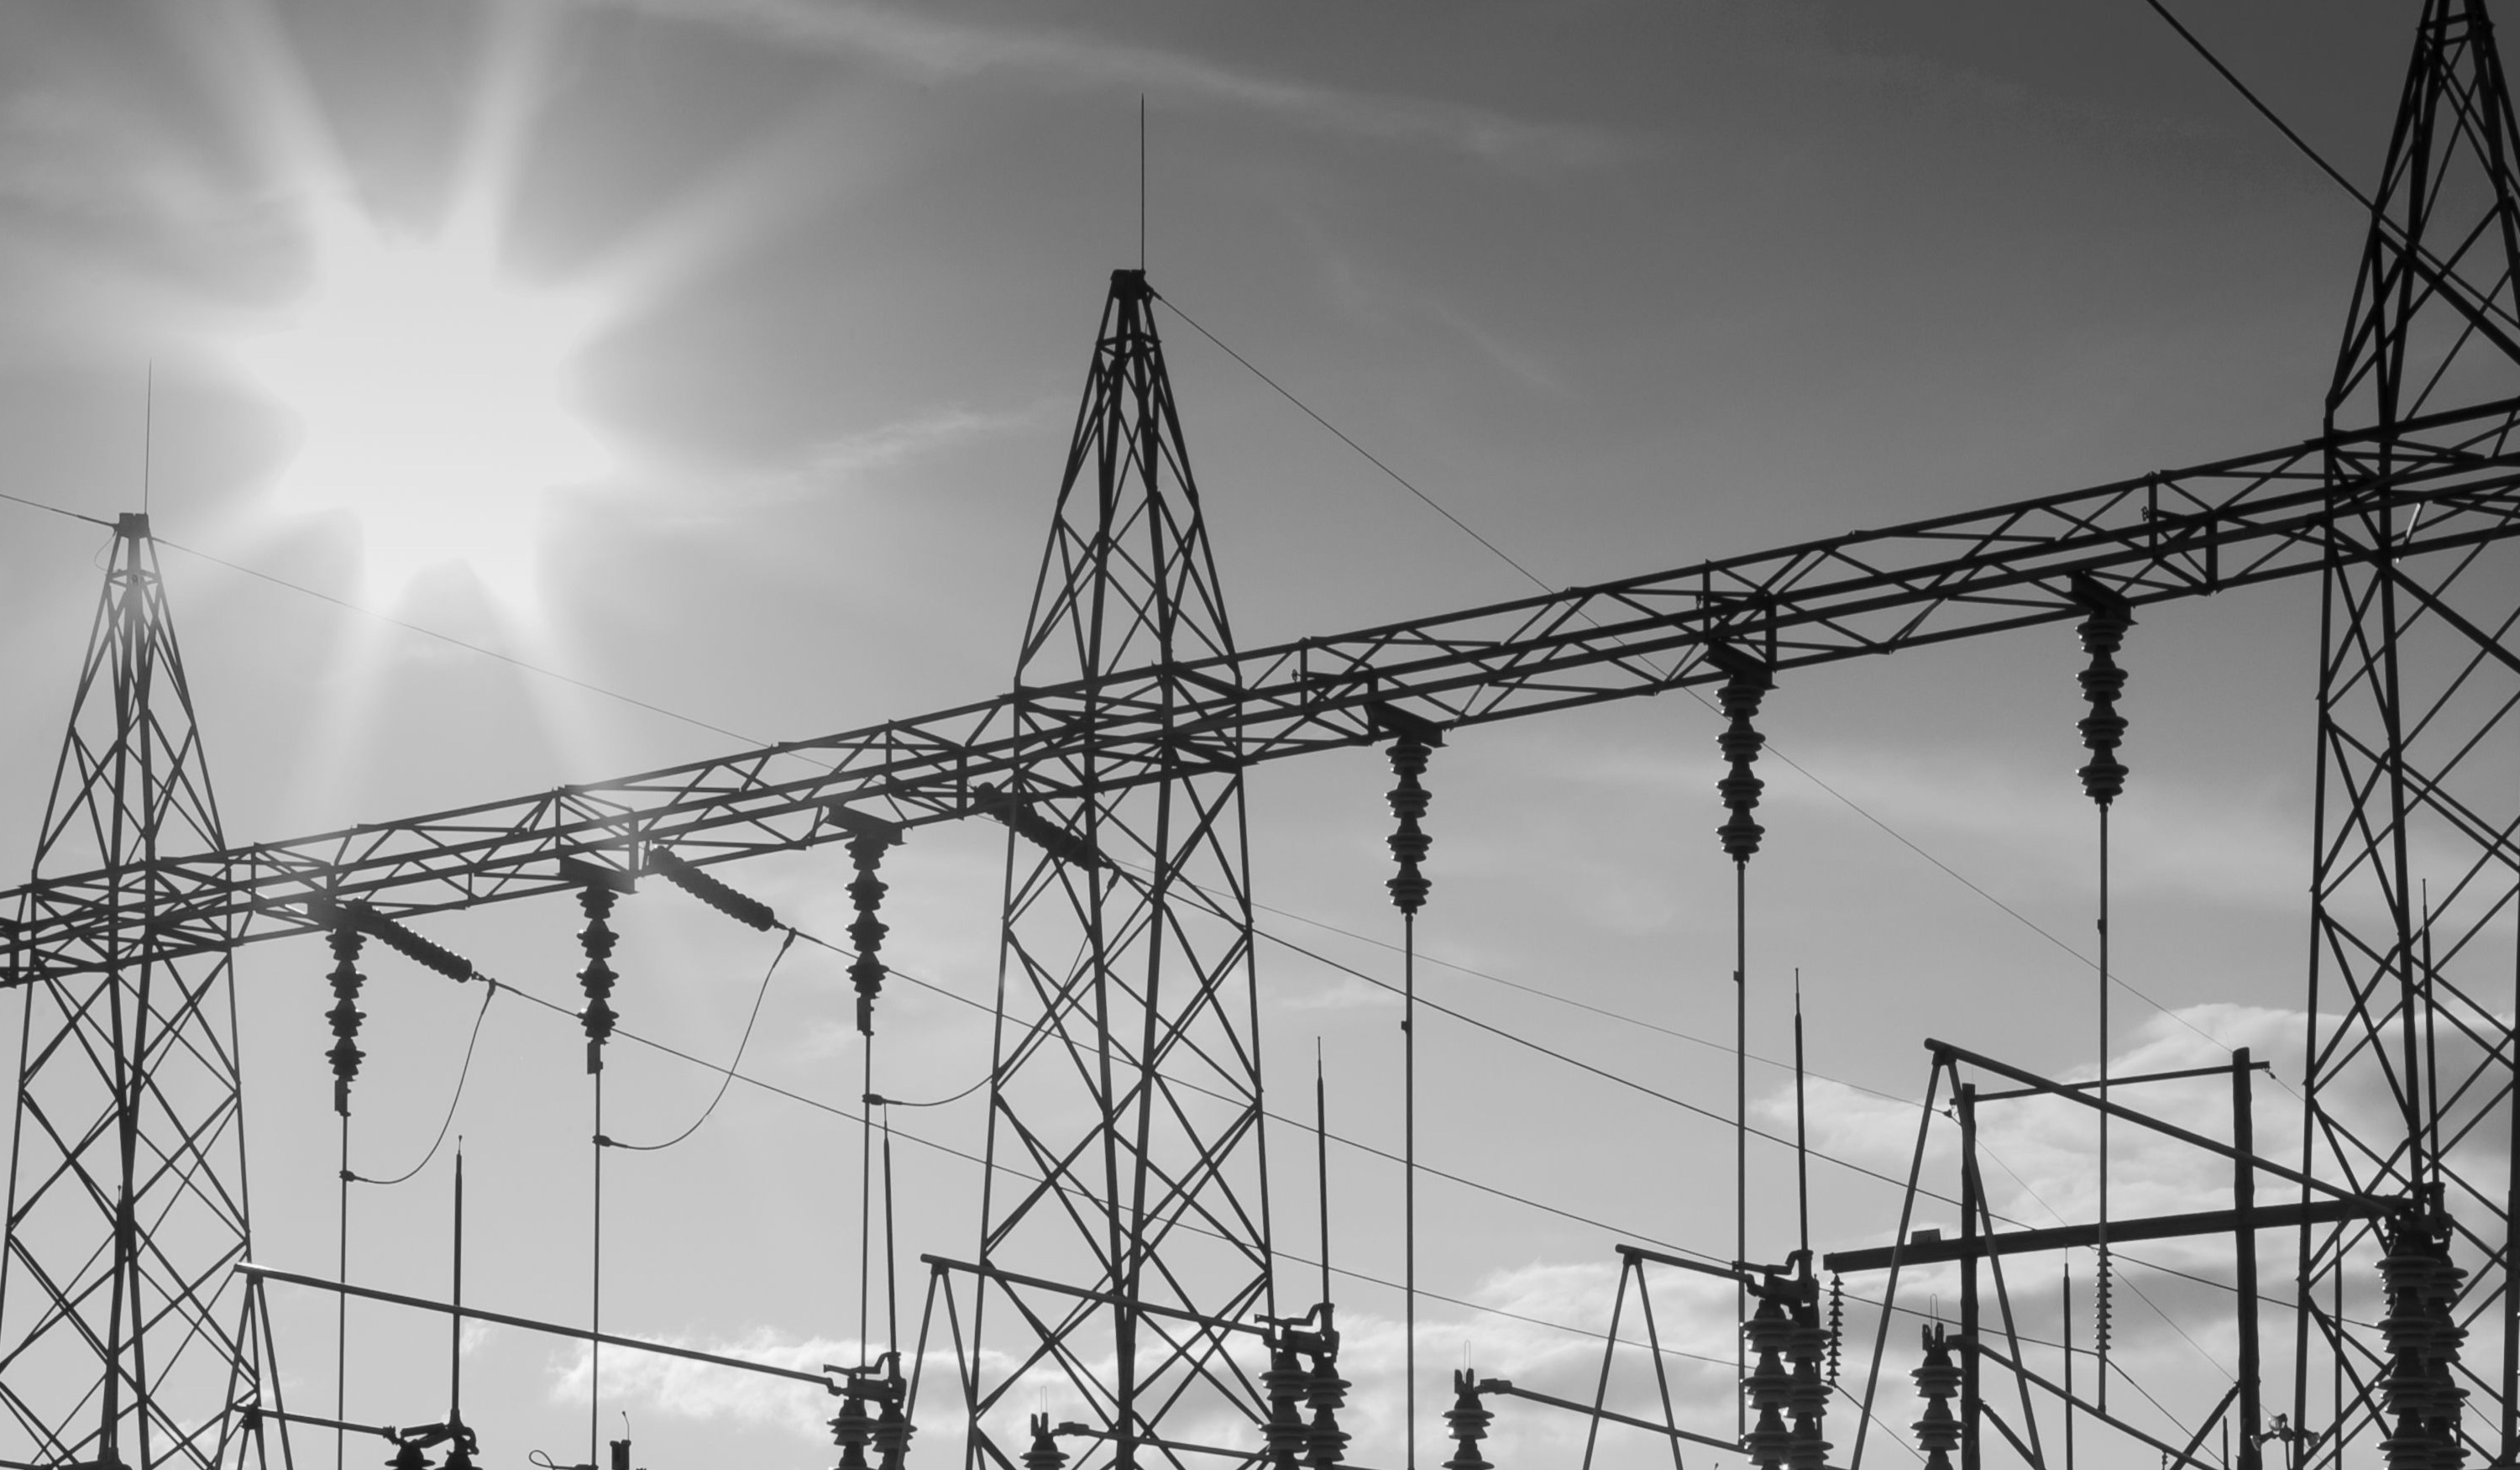 APAC Electricity Distributor Powers Through SAP Audit with Invictus Partners